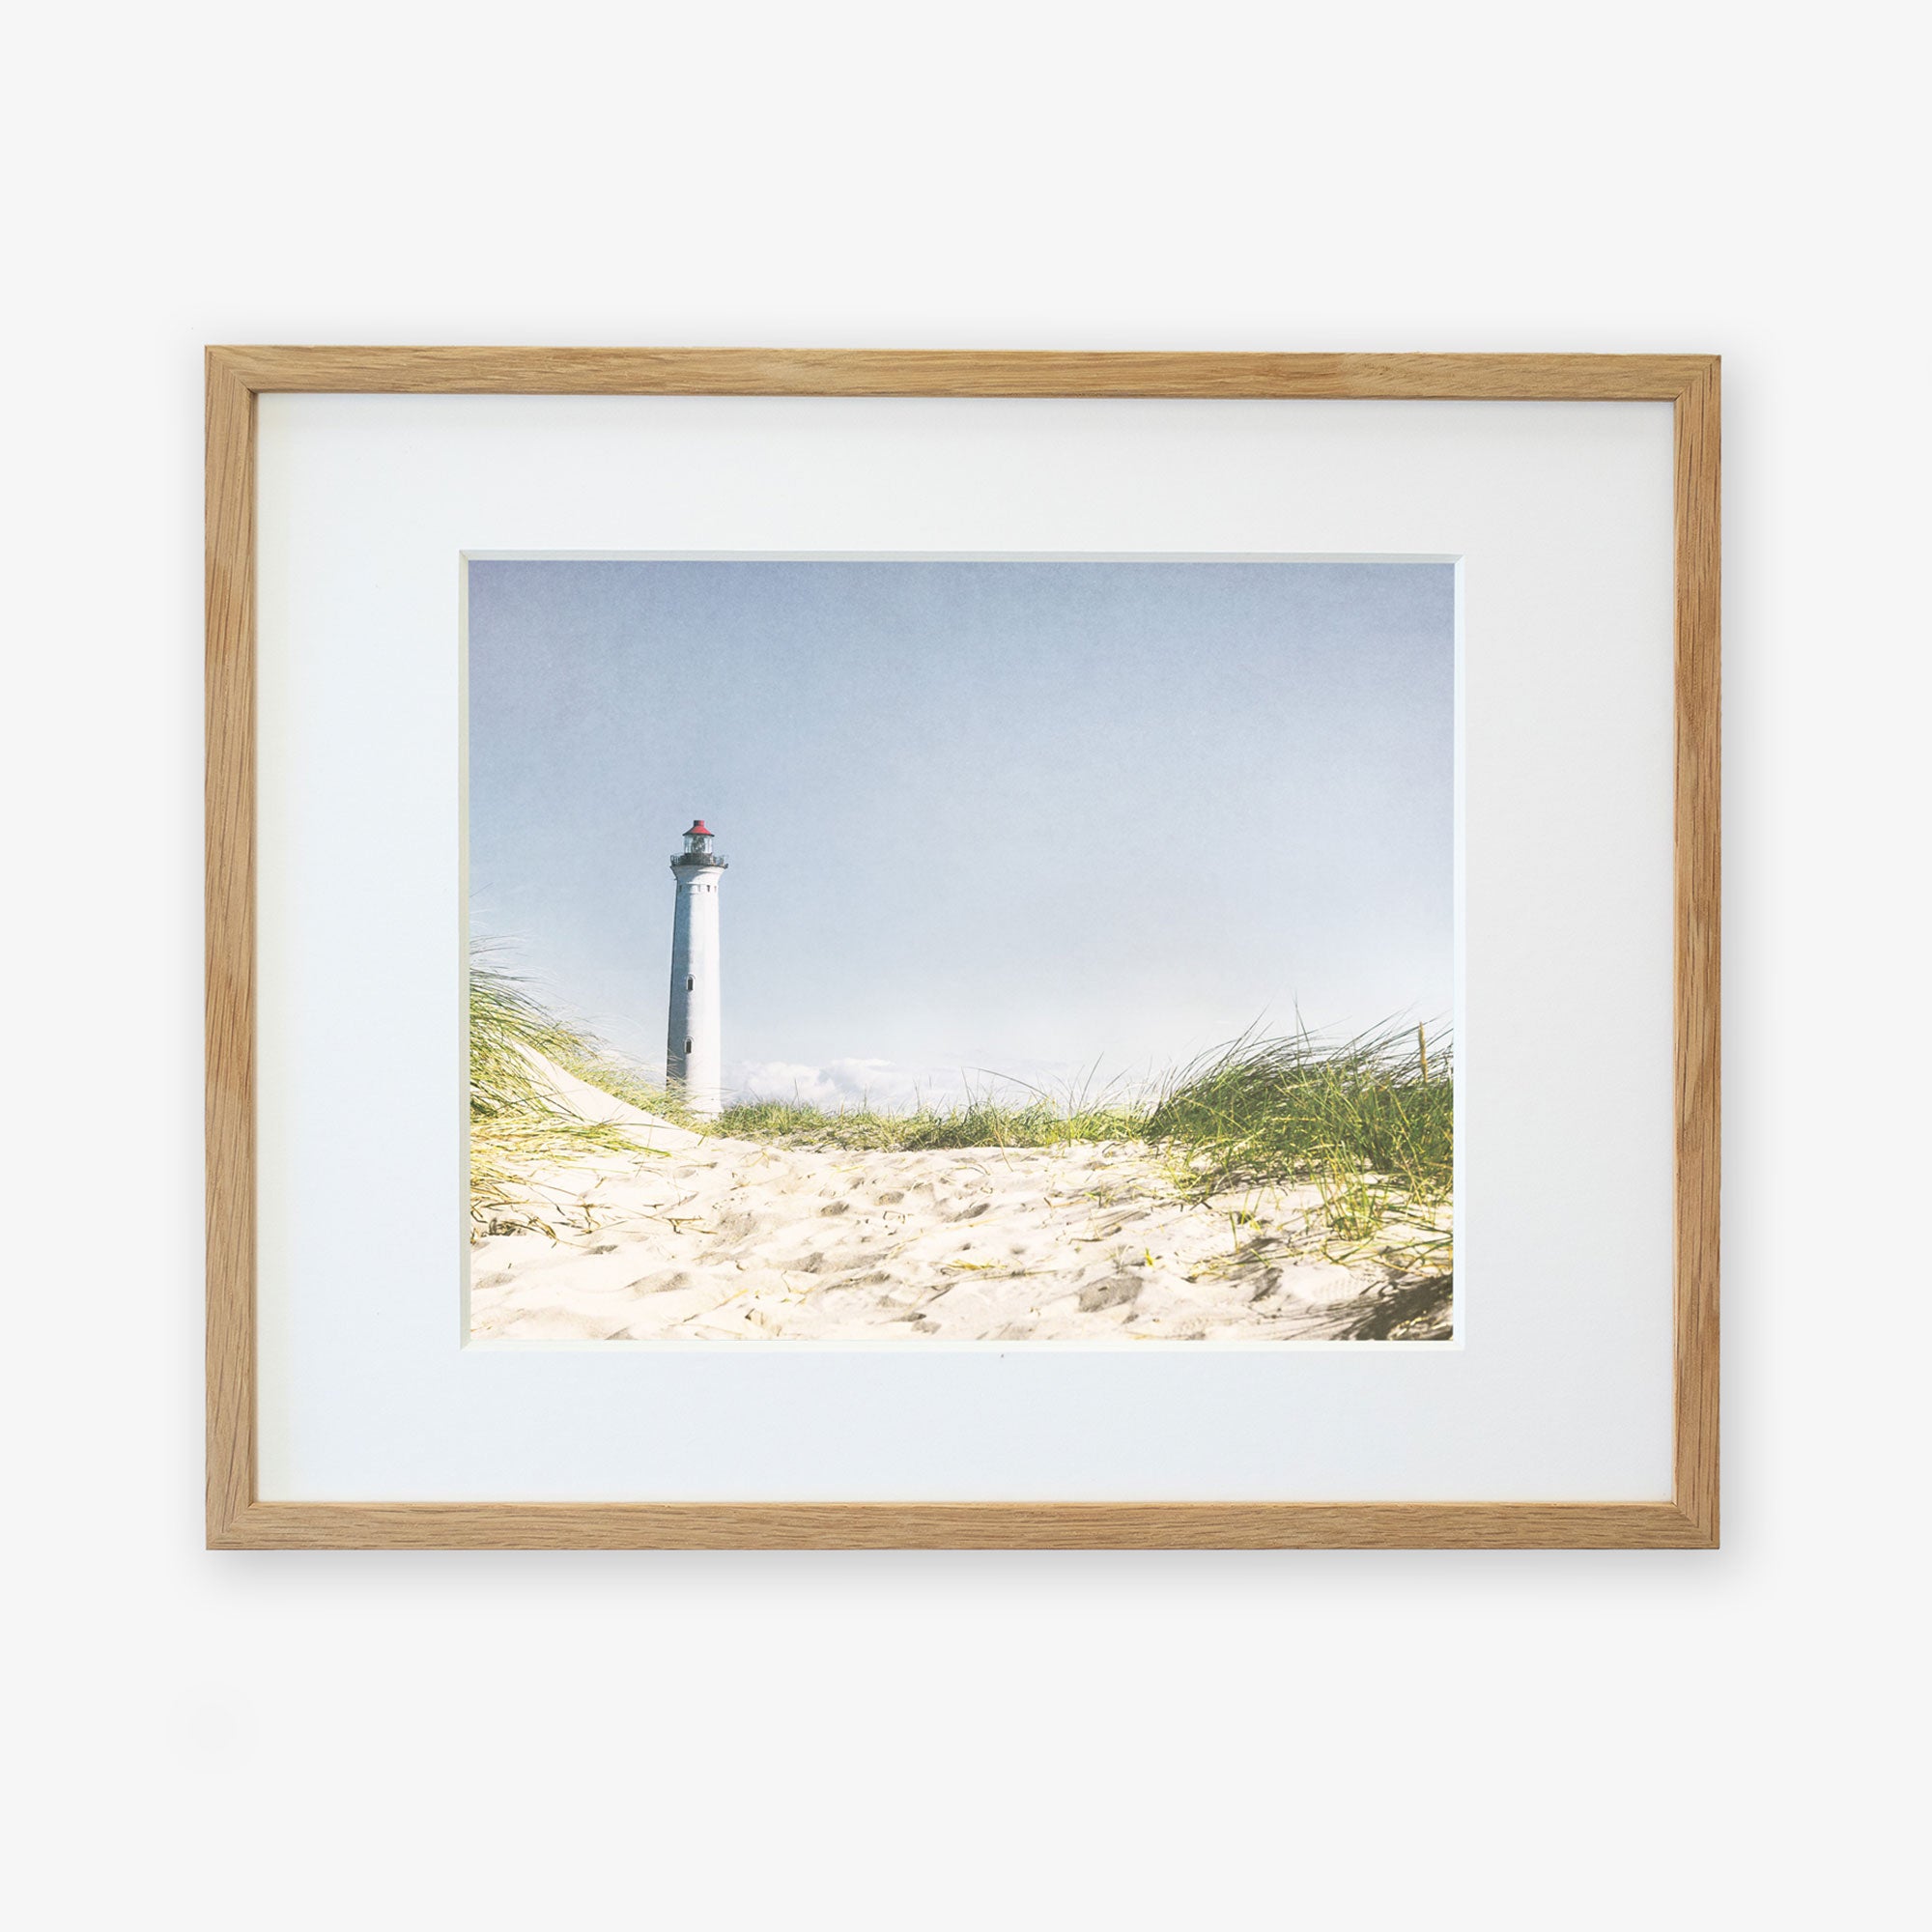 A framed Nautical Print, &#39;The Lighthouse&#39; by Offley Green of a lighthouse viewed from a sandy beach overgrown with tall grass, displayed against a white background. The lighthouse stands tall against a clear blue sky.